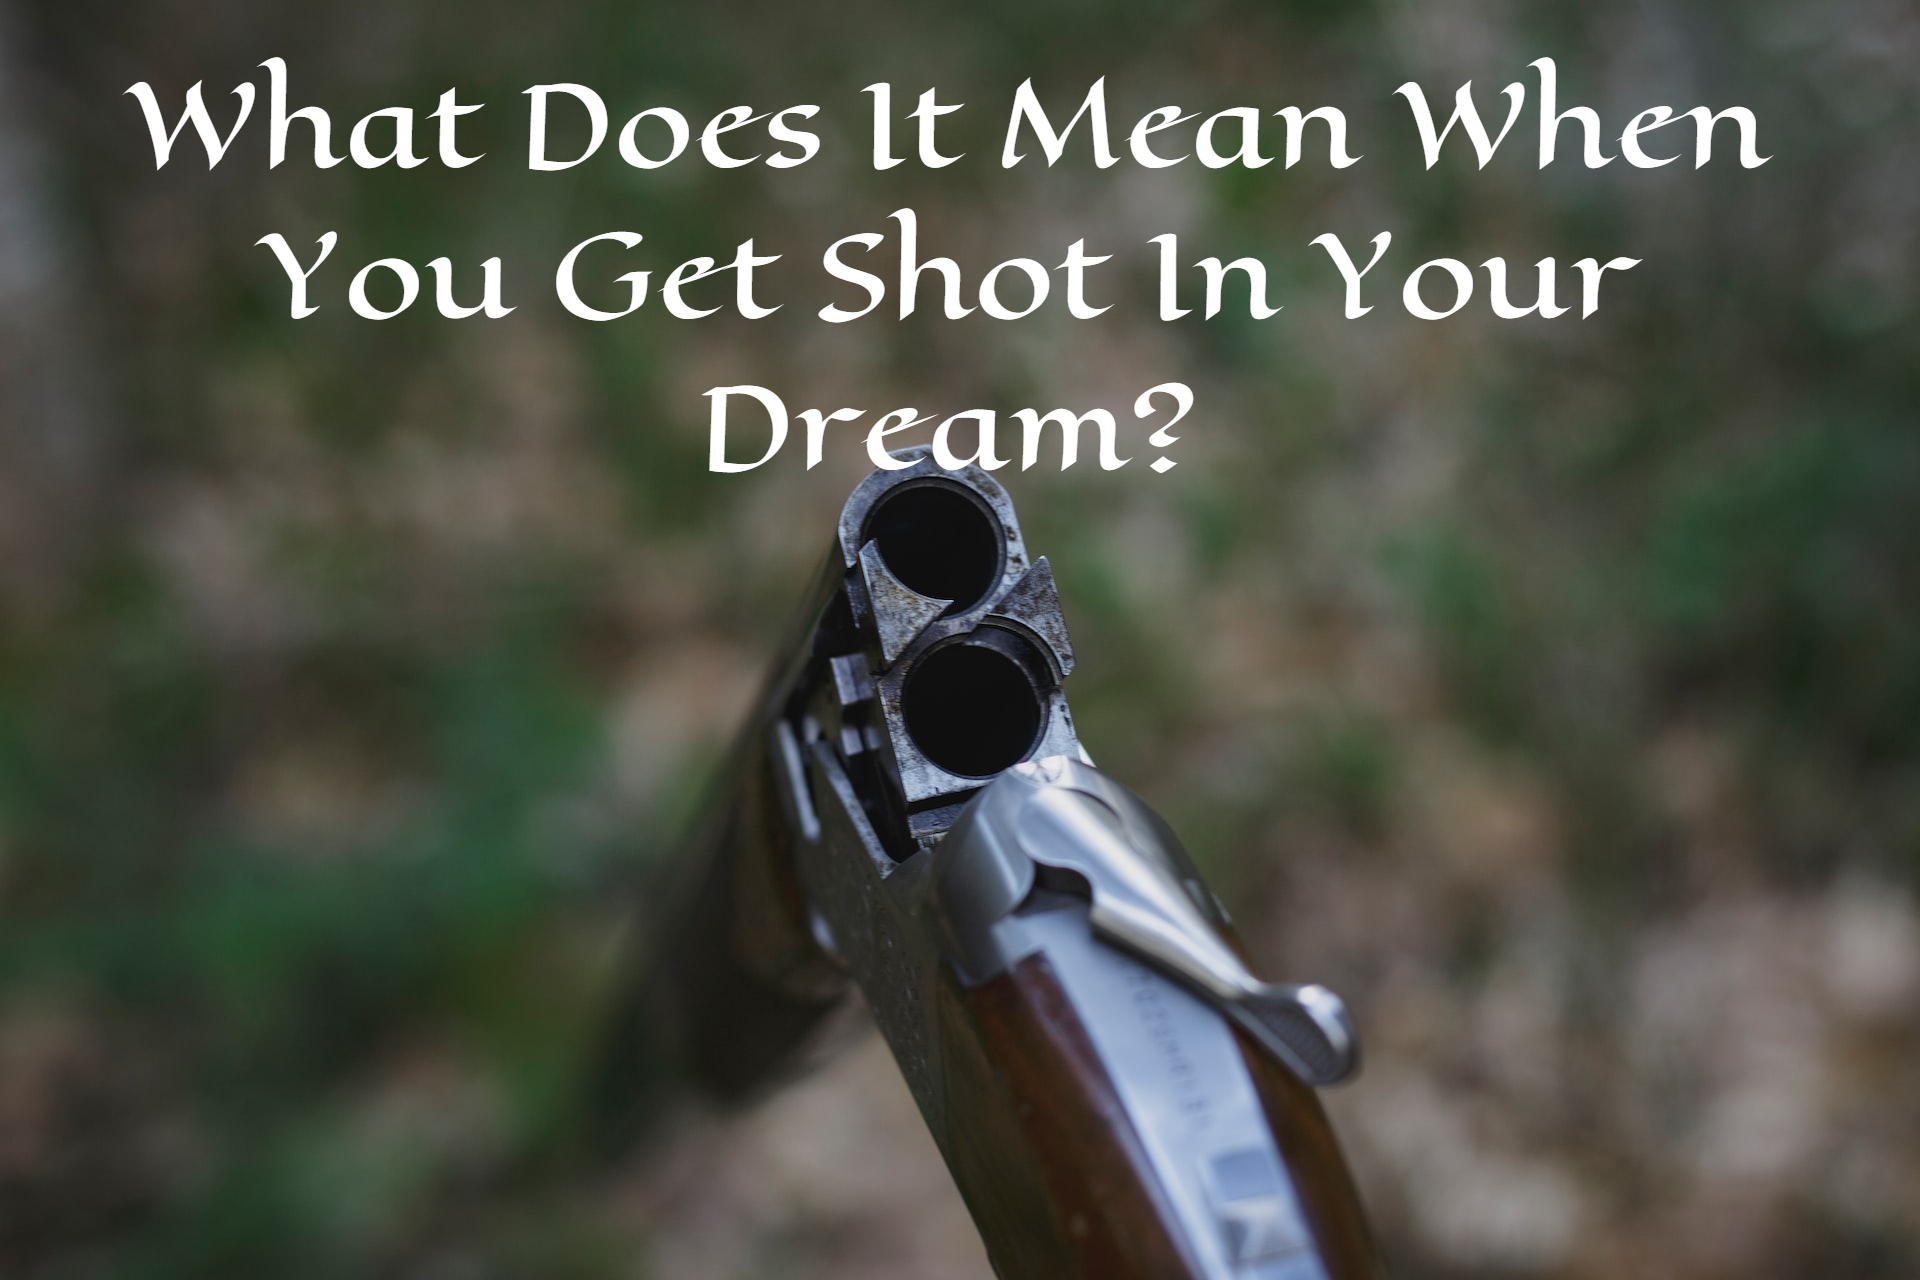 What Does It Mean When You Get Shot In Your Dream?